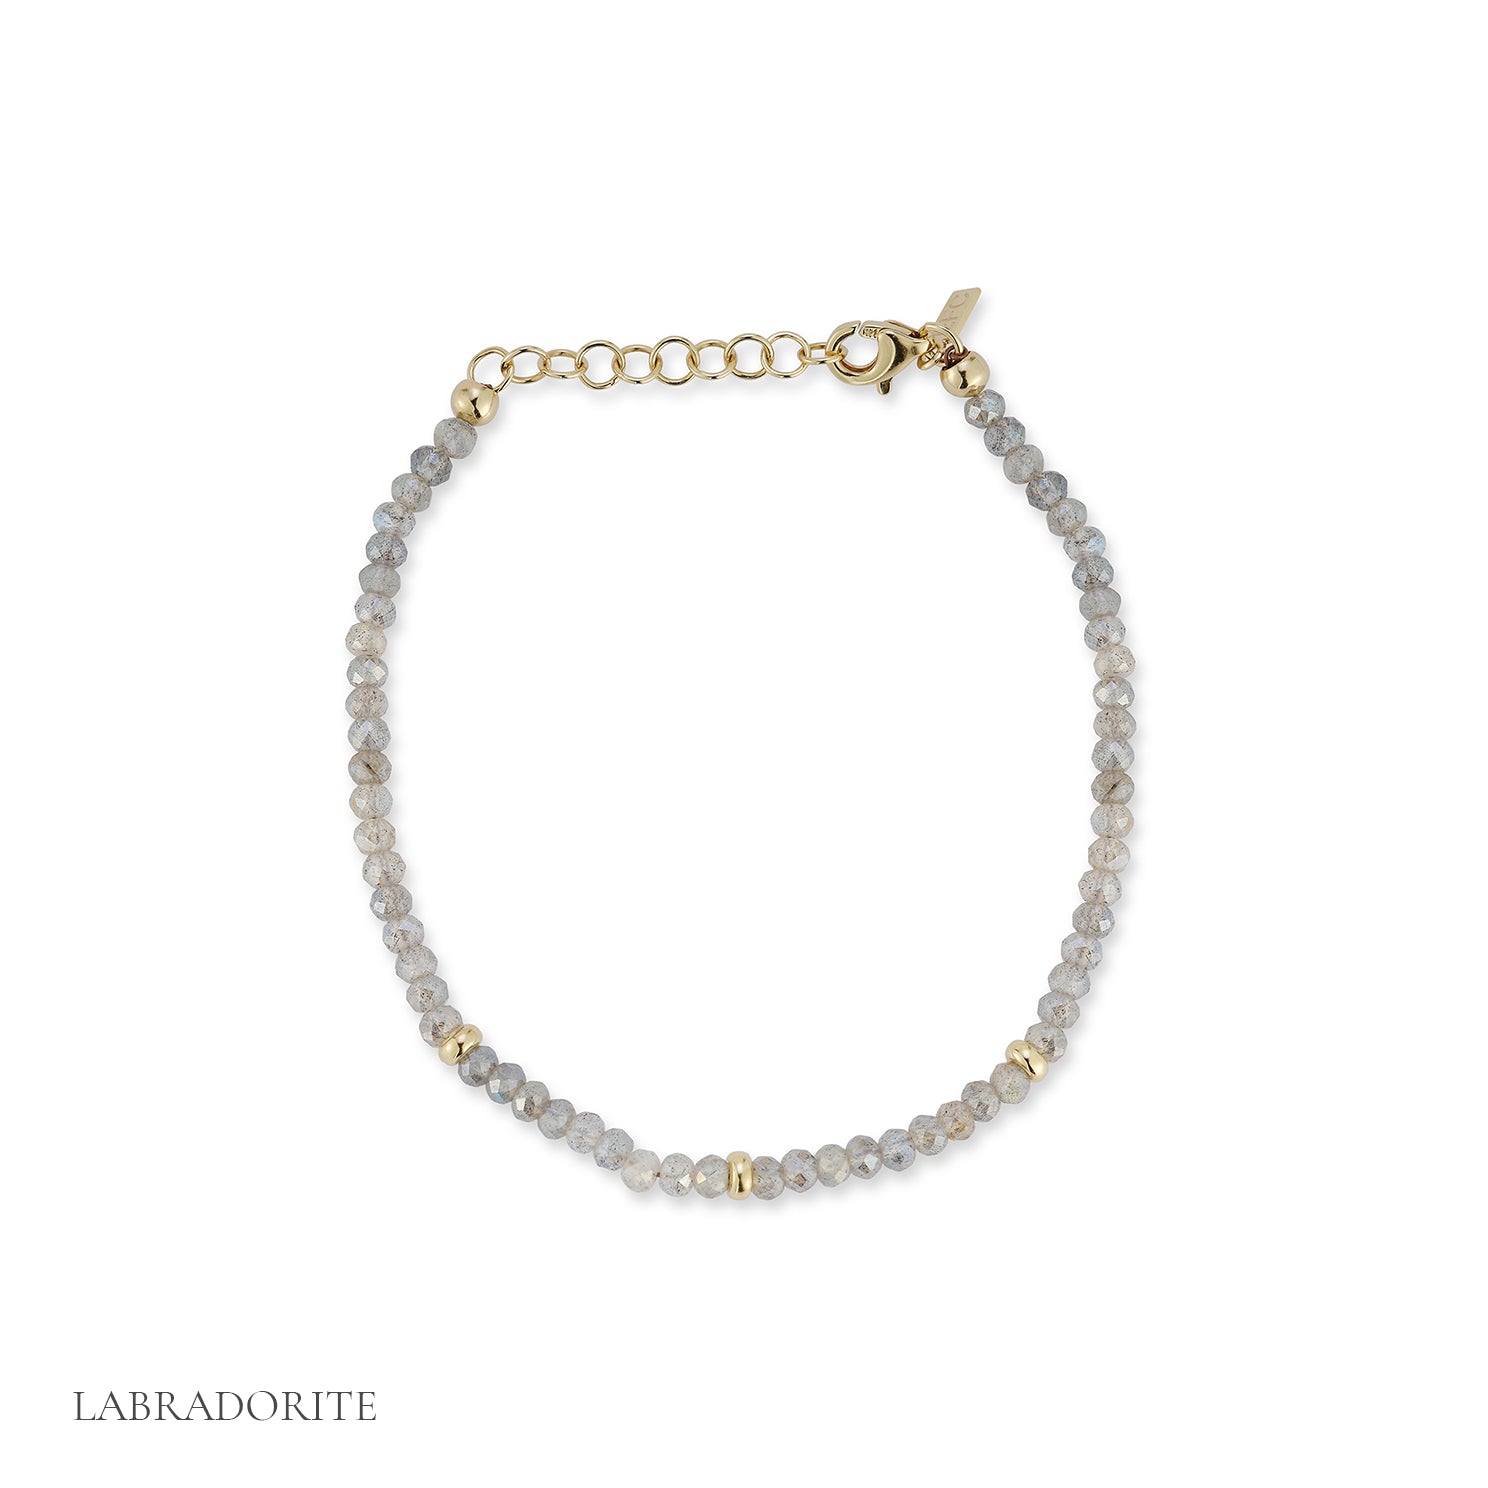 Birthstone Bead Bracelet In Labradorite with 14k yellow gold chain - August Option